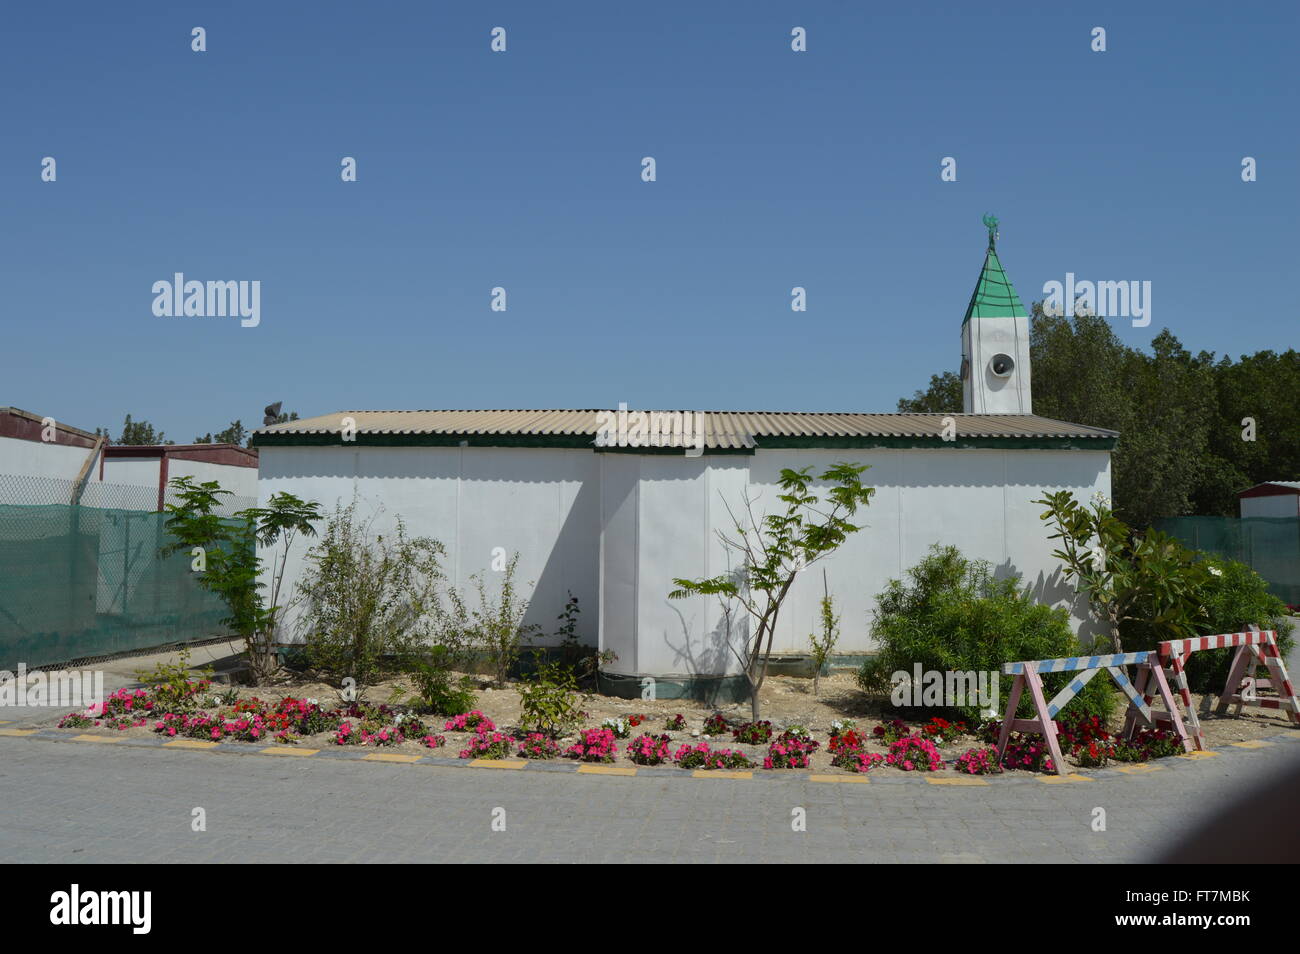 mosque, garden, fench, green tree, roof Stock Photo